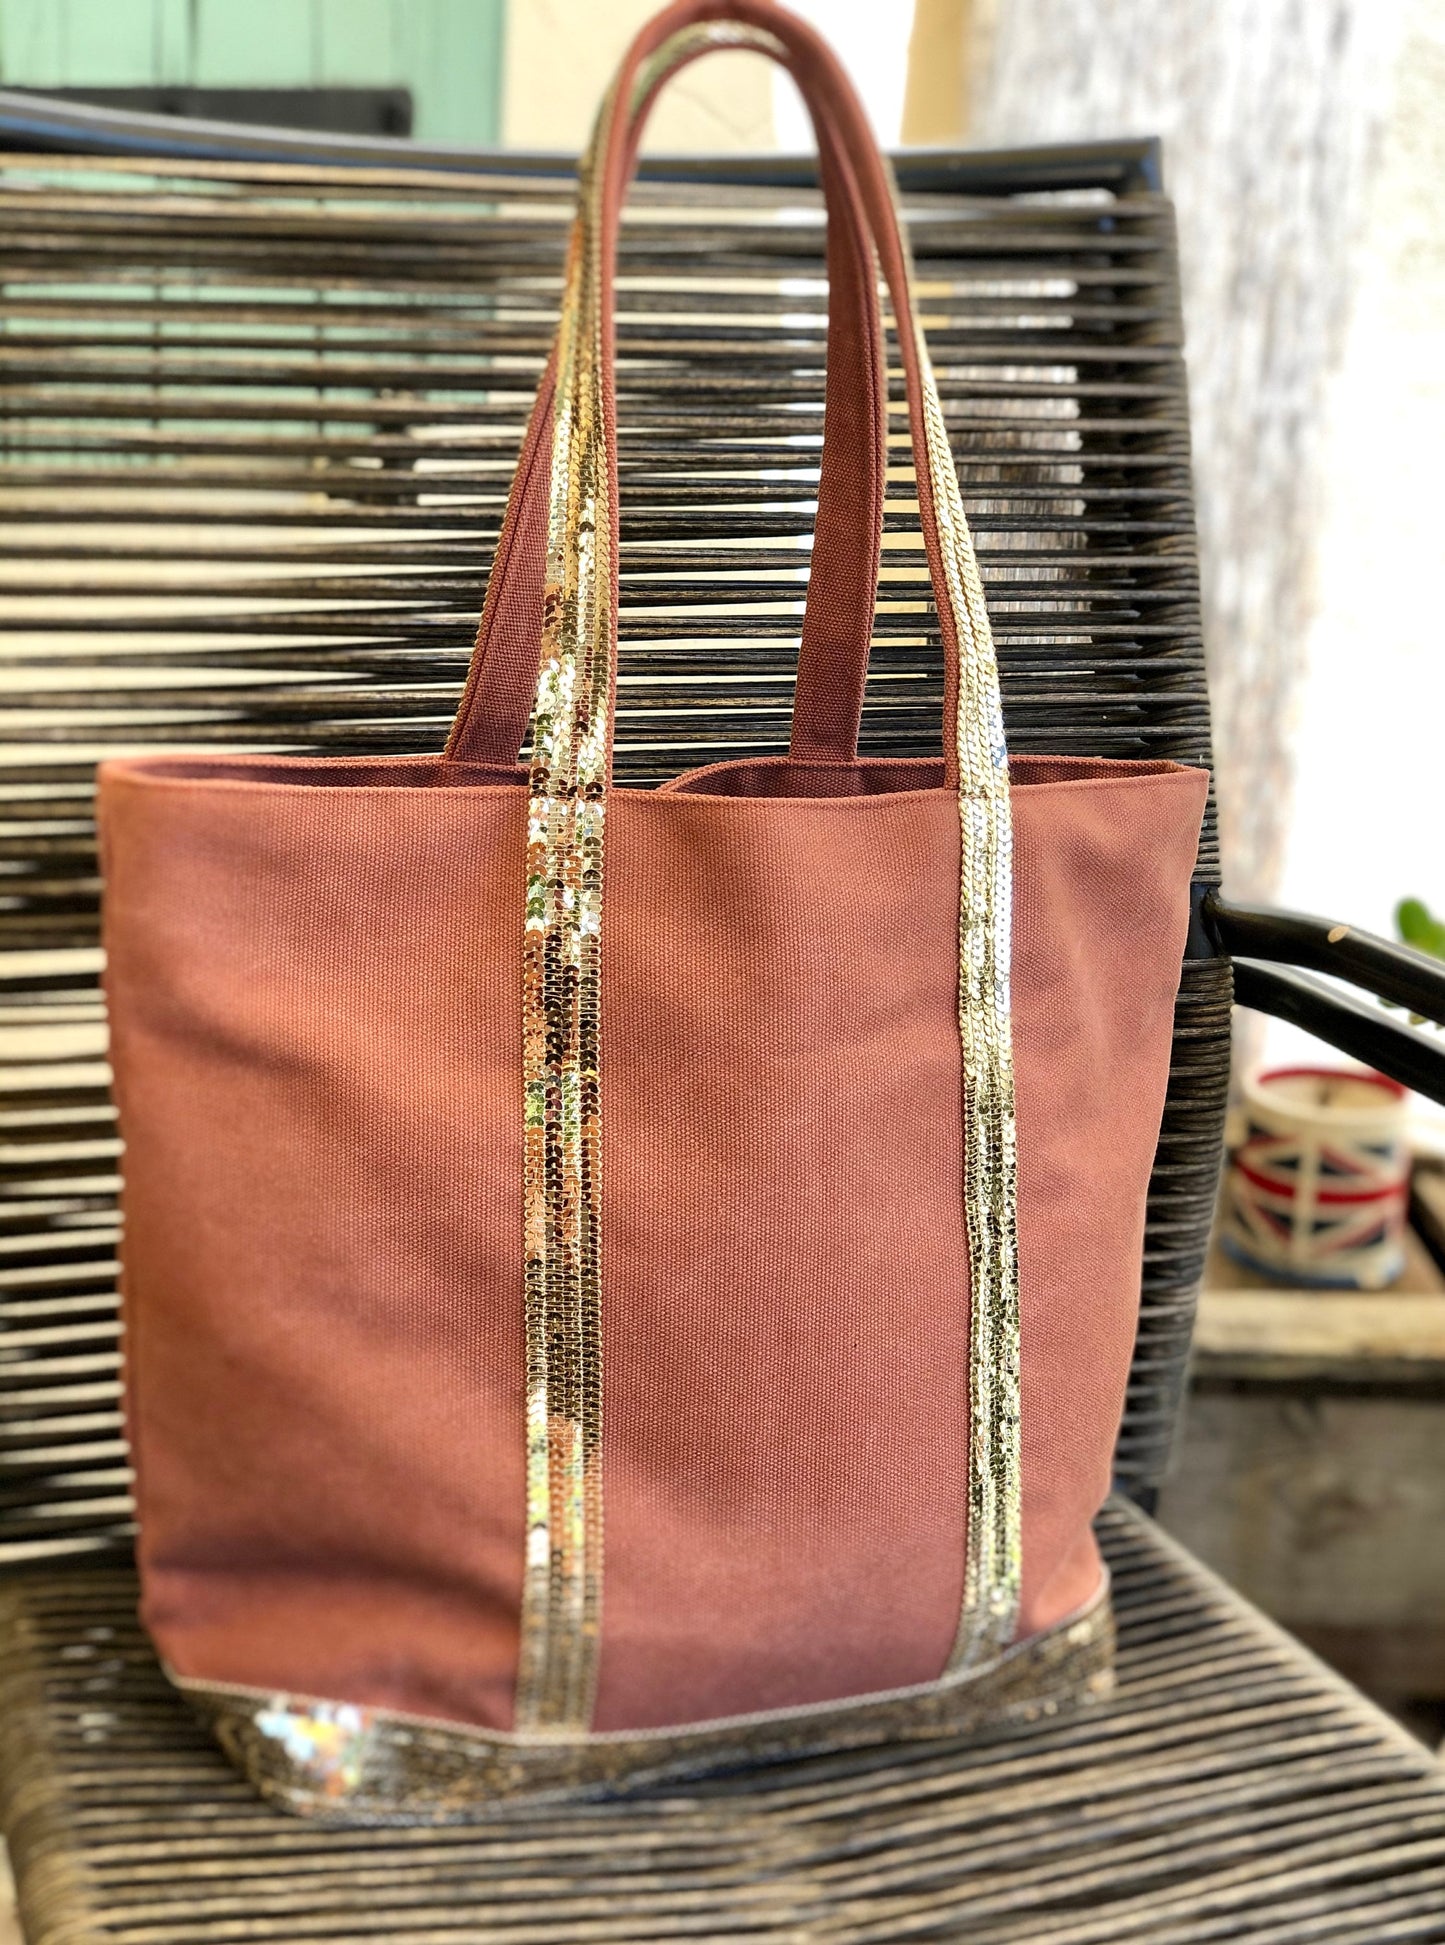 Terracotta cotton tote bag with gold sequins